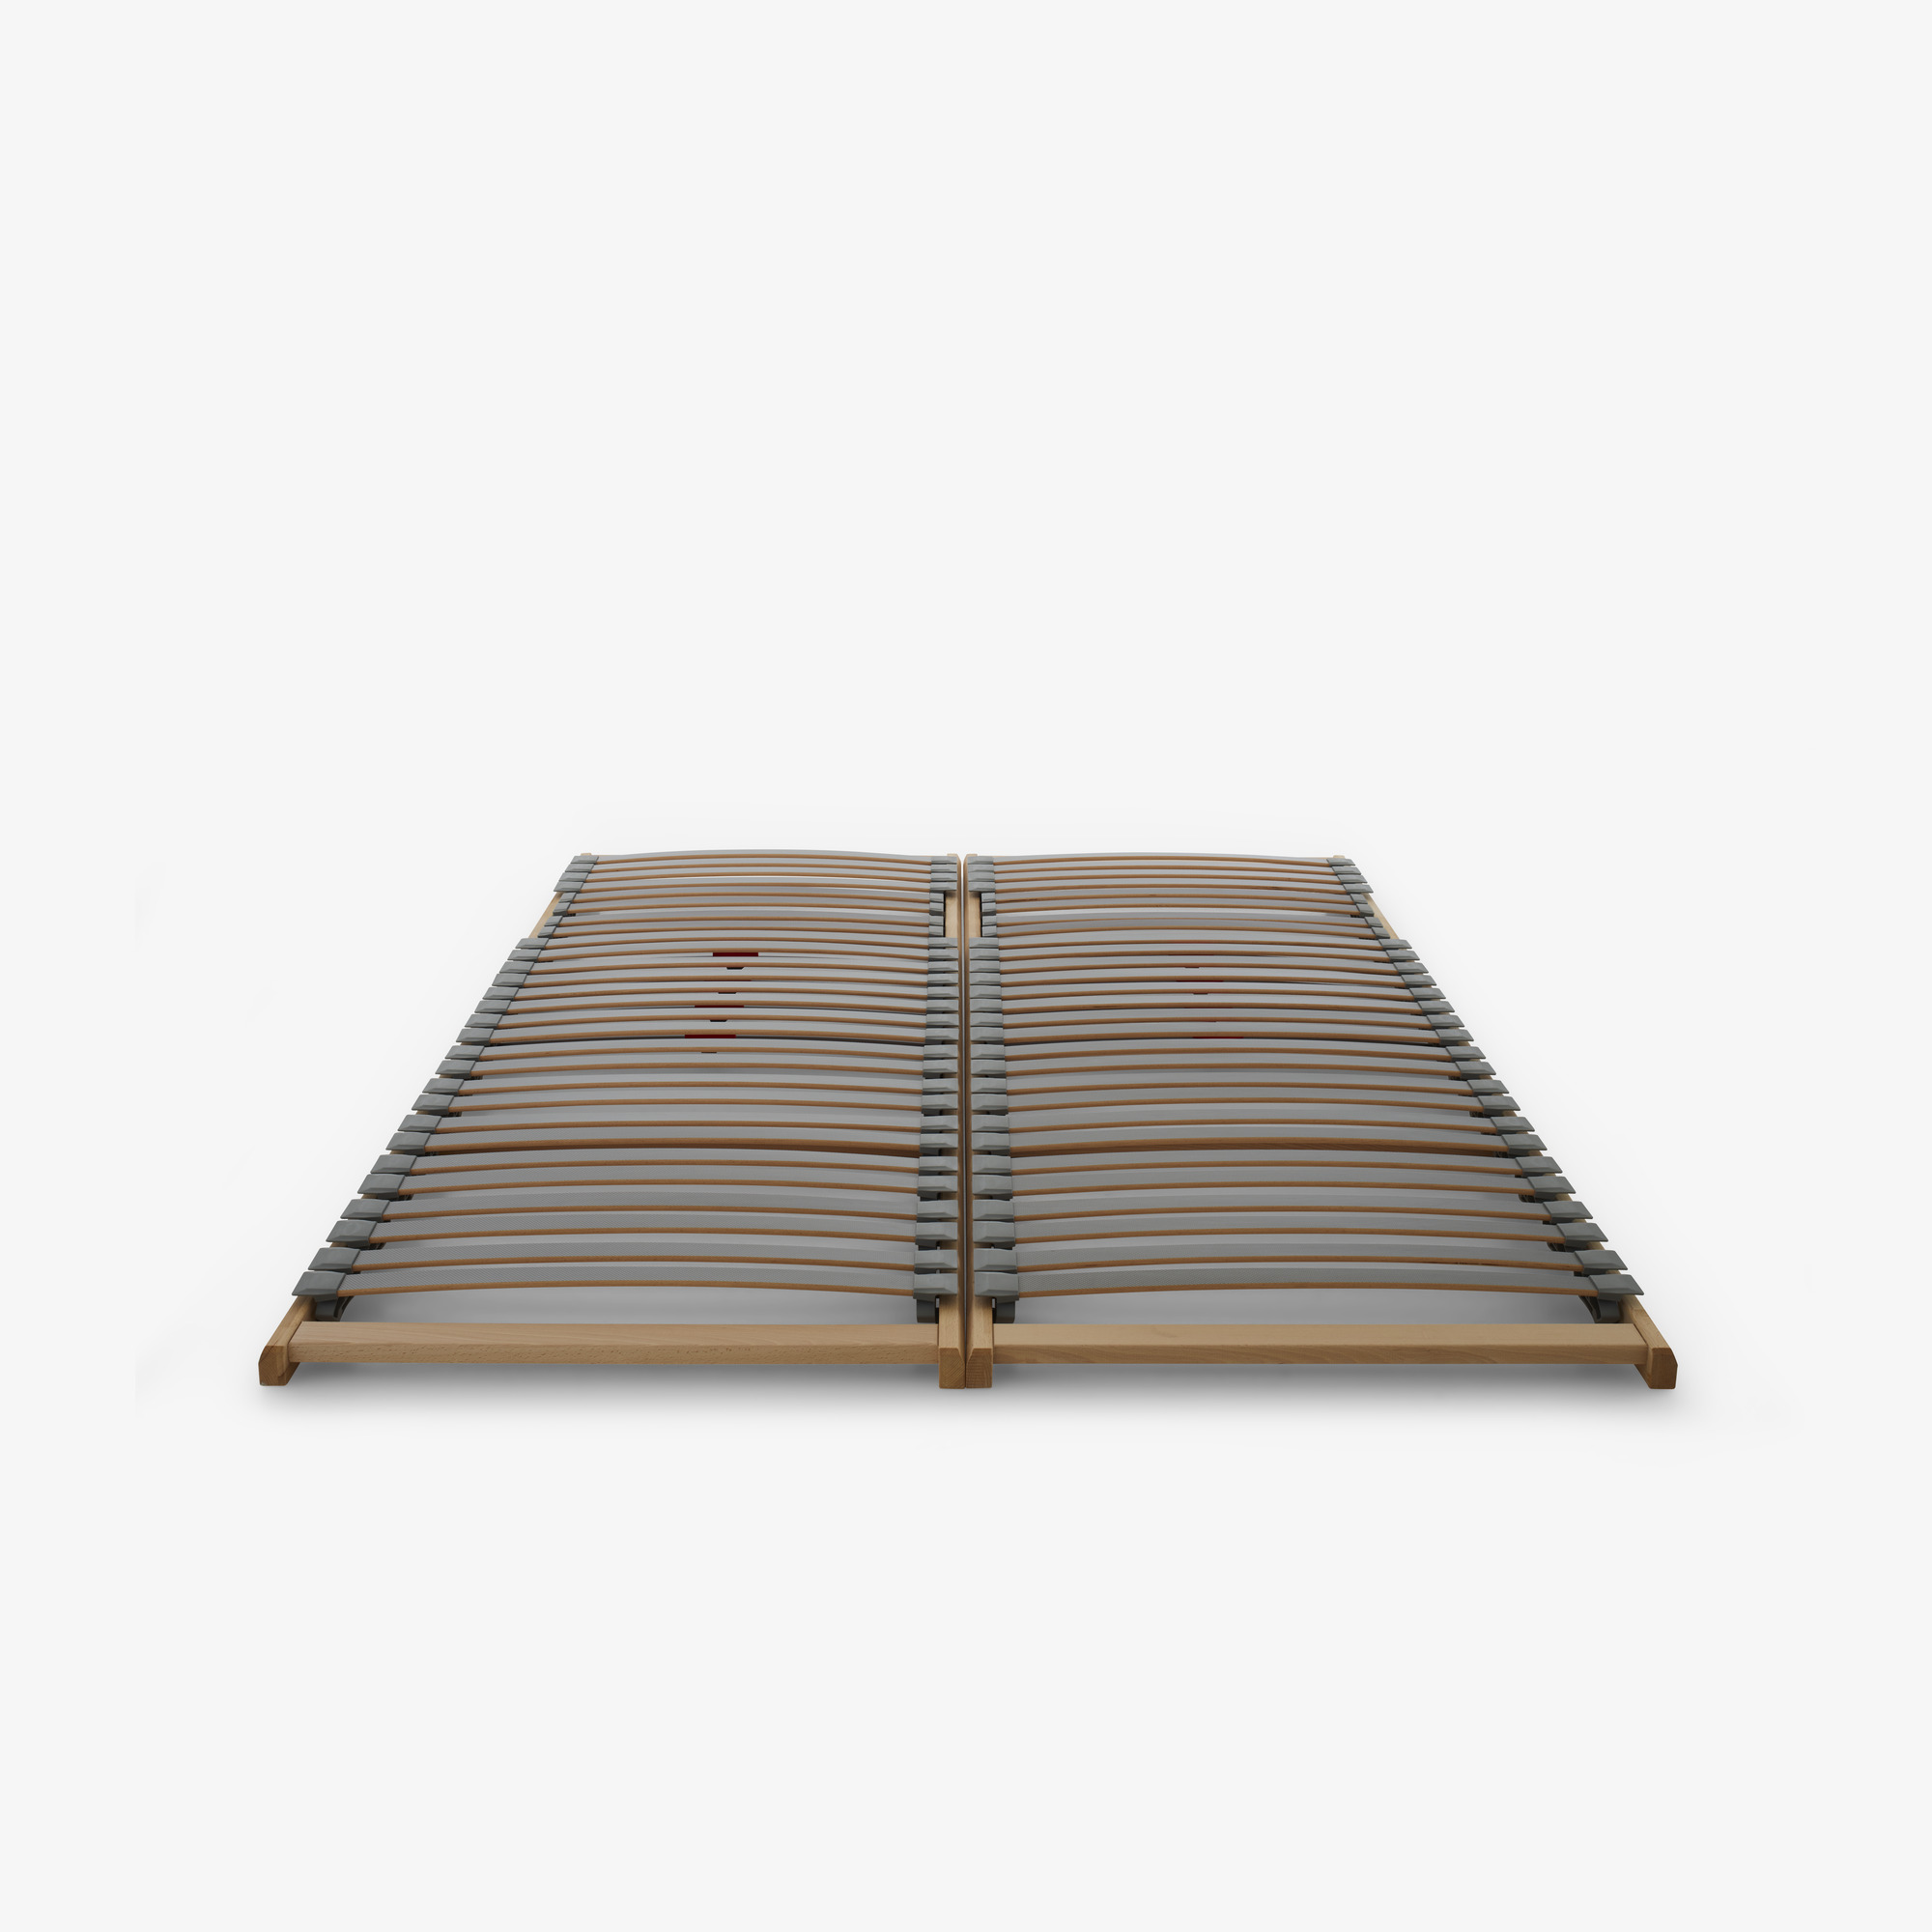 Image SLATTED BASE - WITH DOUBLE SLATS WITH ARTICULATED SUPPORTS